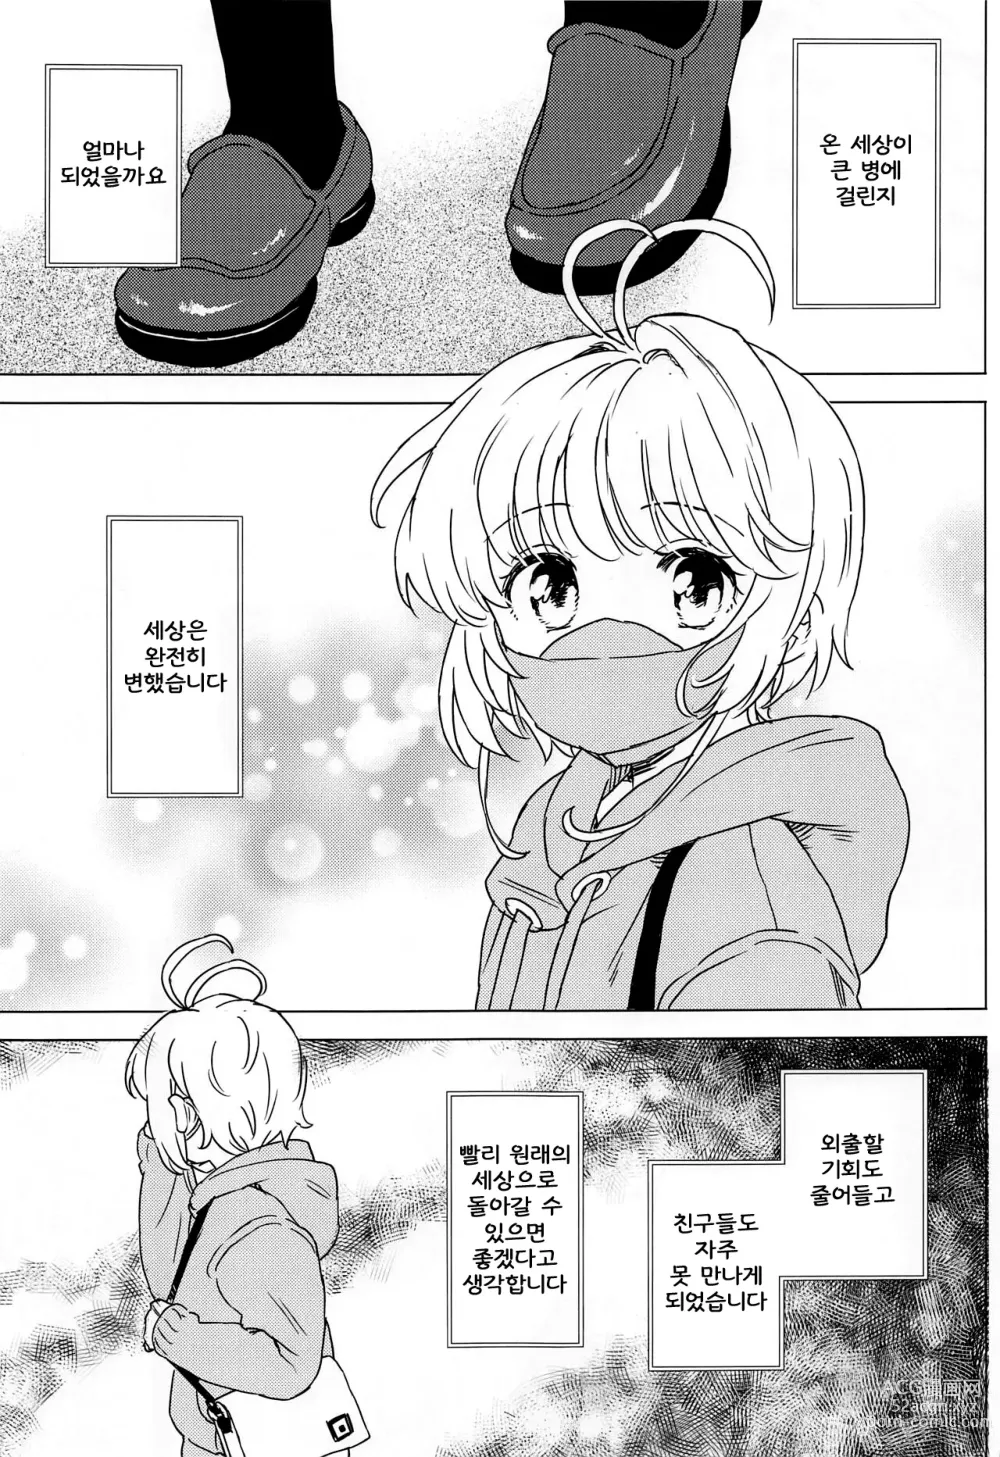 Page 4 of doujinshi 사쿠라와 샤오랑의 집 데이트